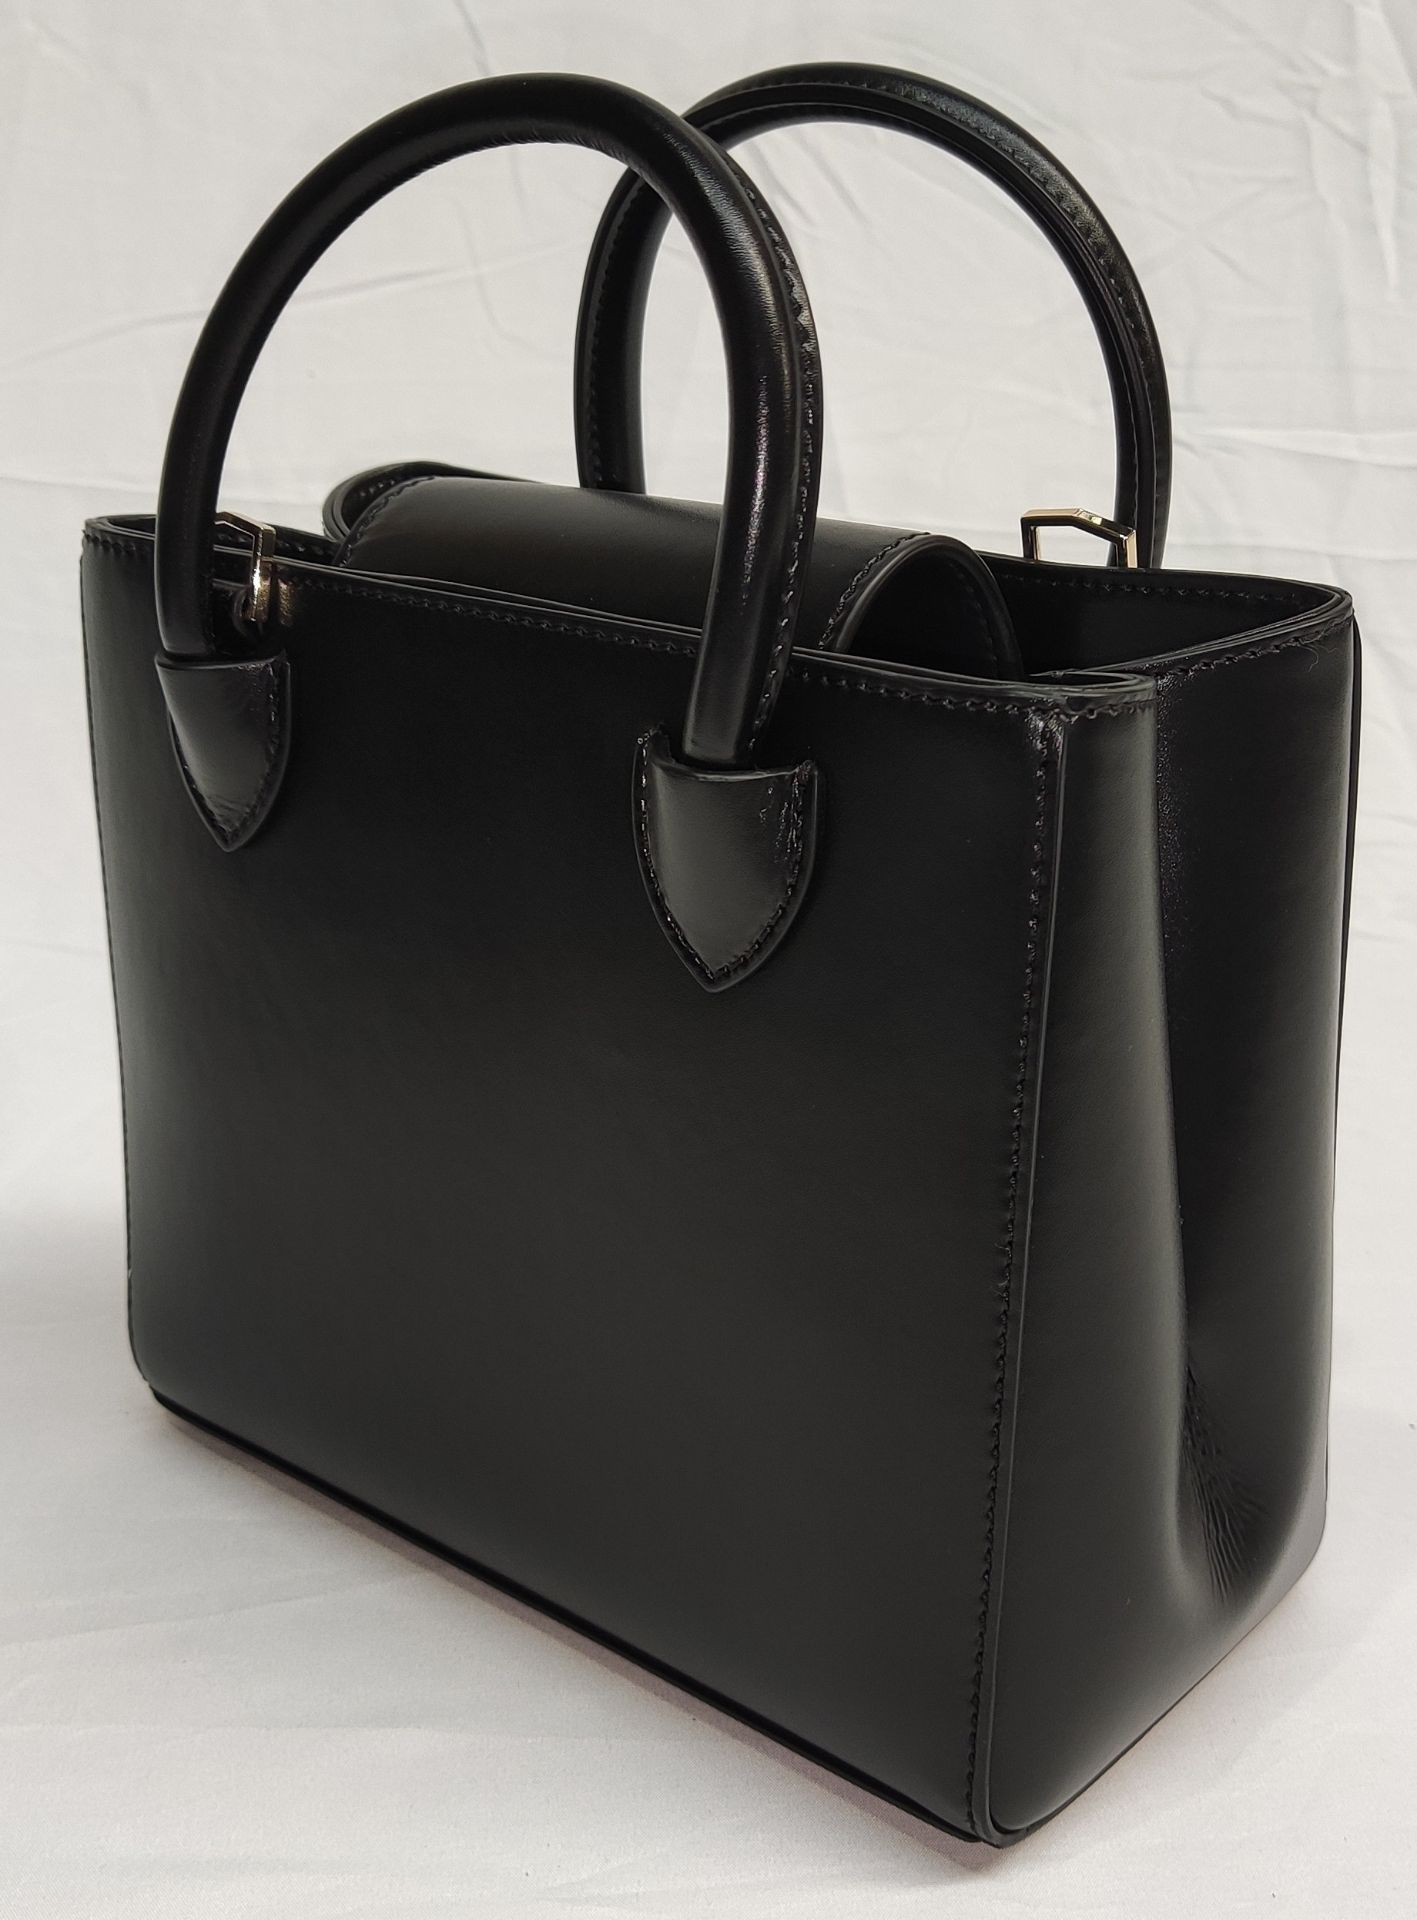 1 x ASPINAL OF LONDON Mini Madison Tote In Smooth Black - Boxed - Original RRP £495 - Ref: 7242894/ - Image 3 of 20